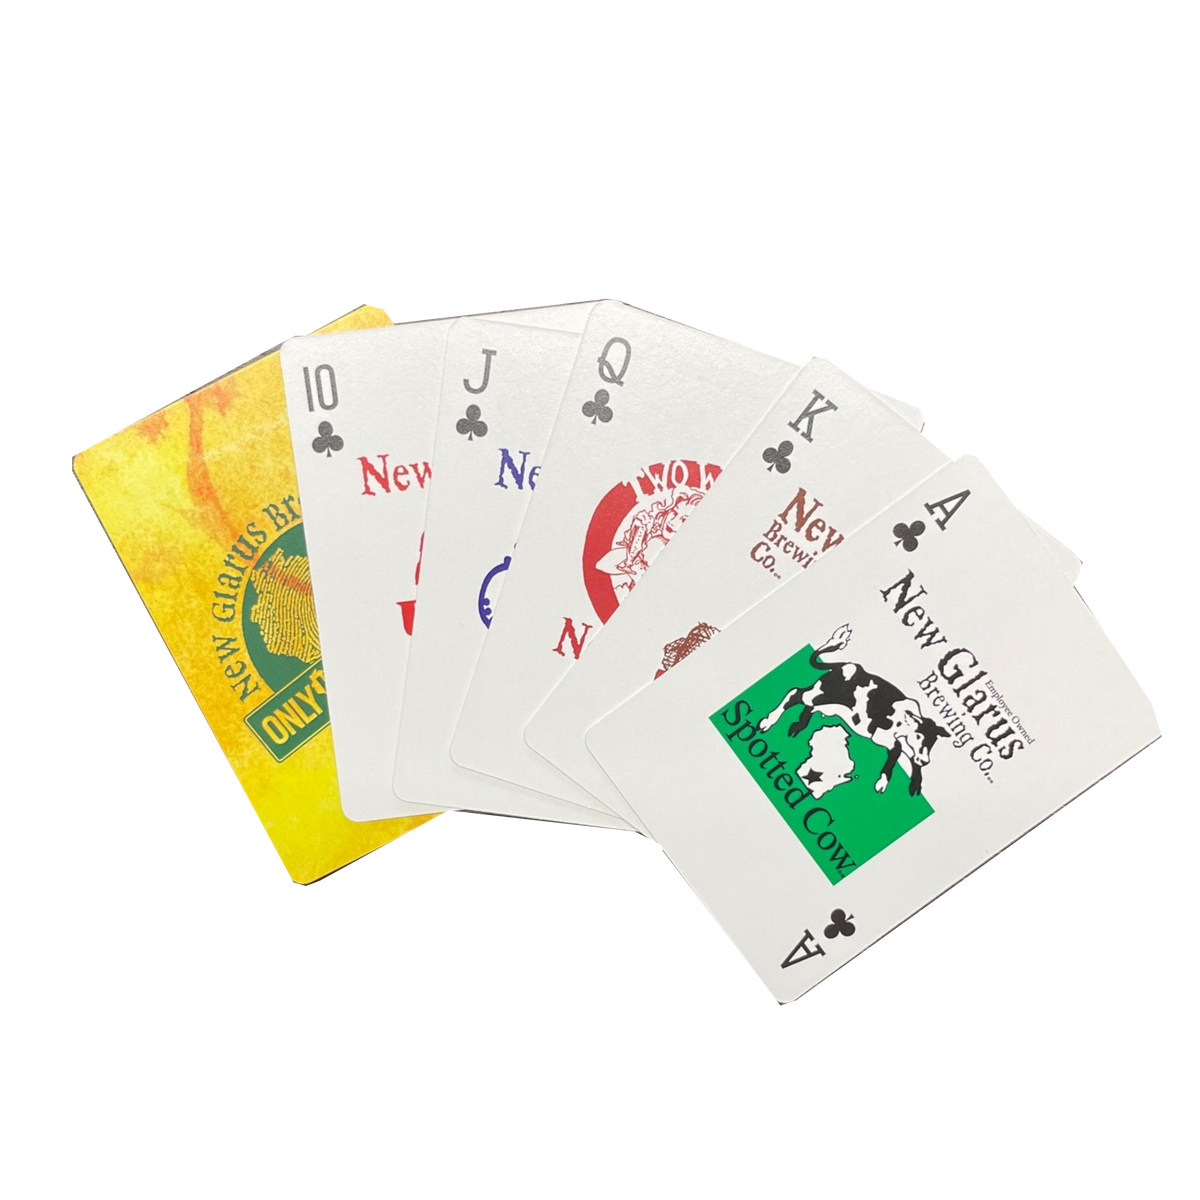 Spread of 6 cards showing different beer logos on each card.